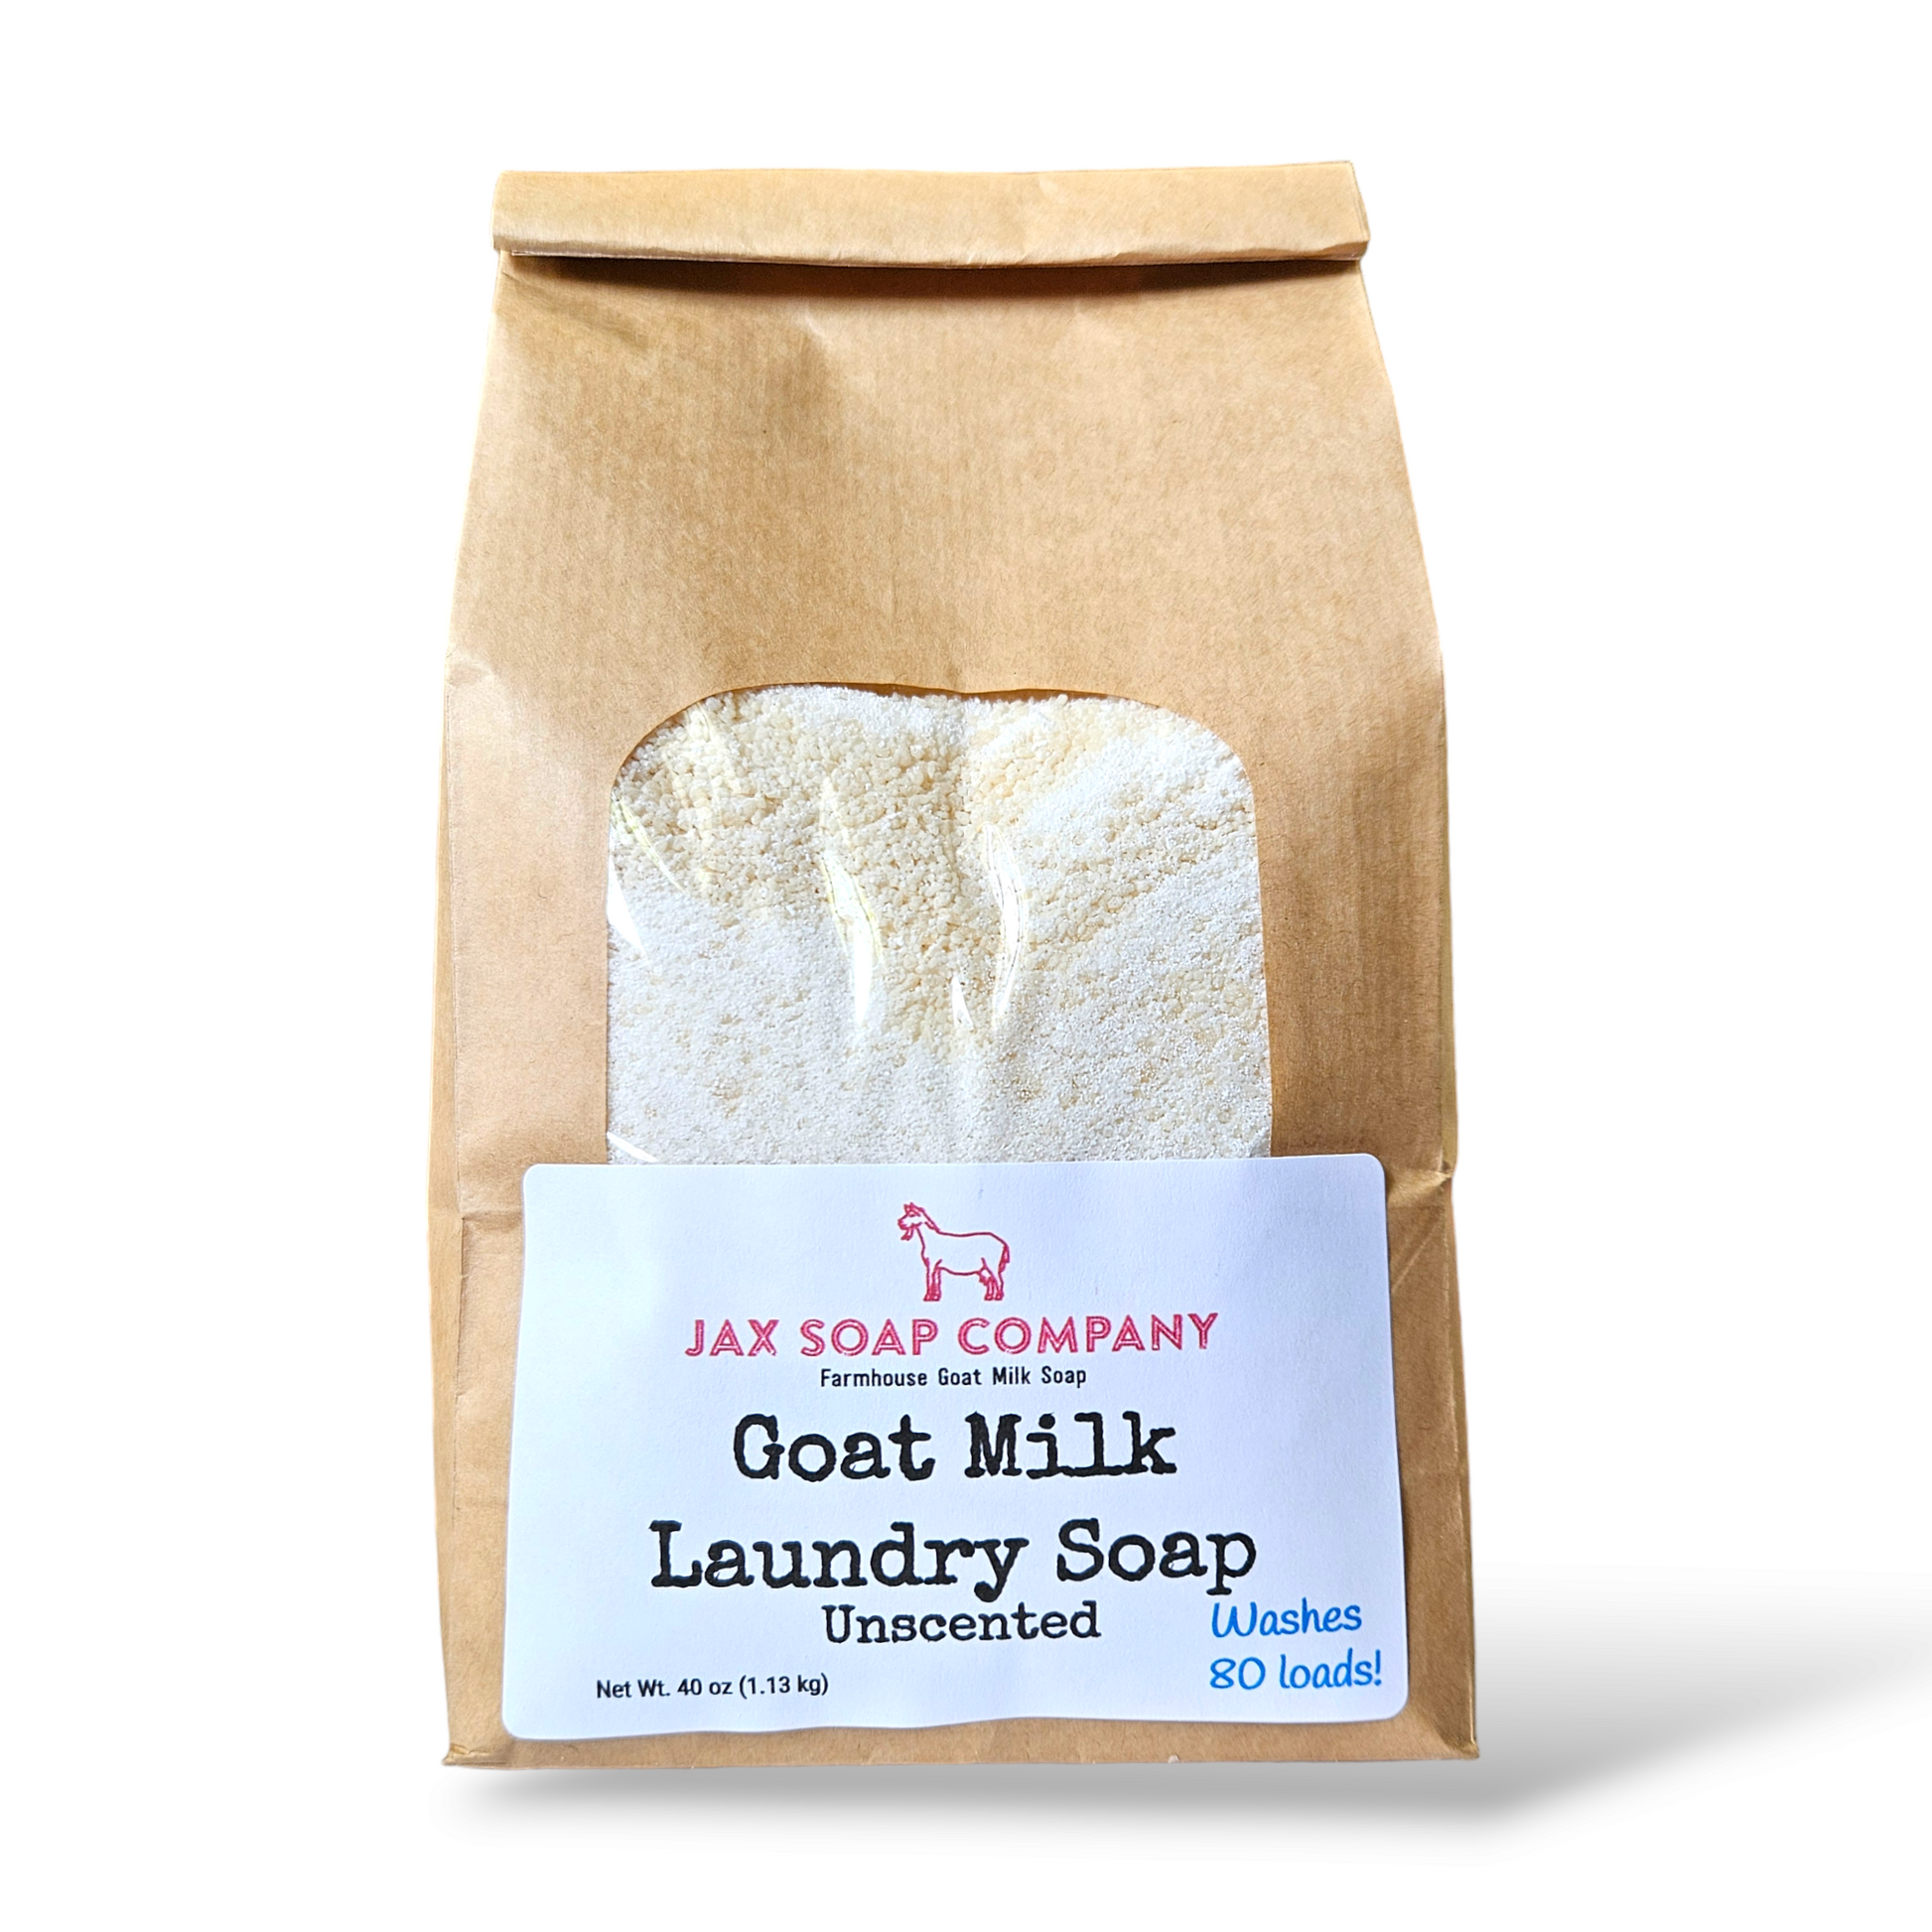 Goat Milk Laundry Soap Refill, 80 loads  Jax Soap Company Unscented With 1 tablespoon scoop 